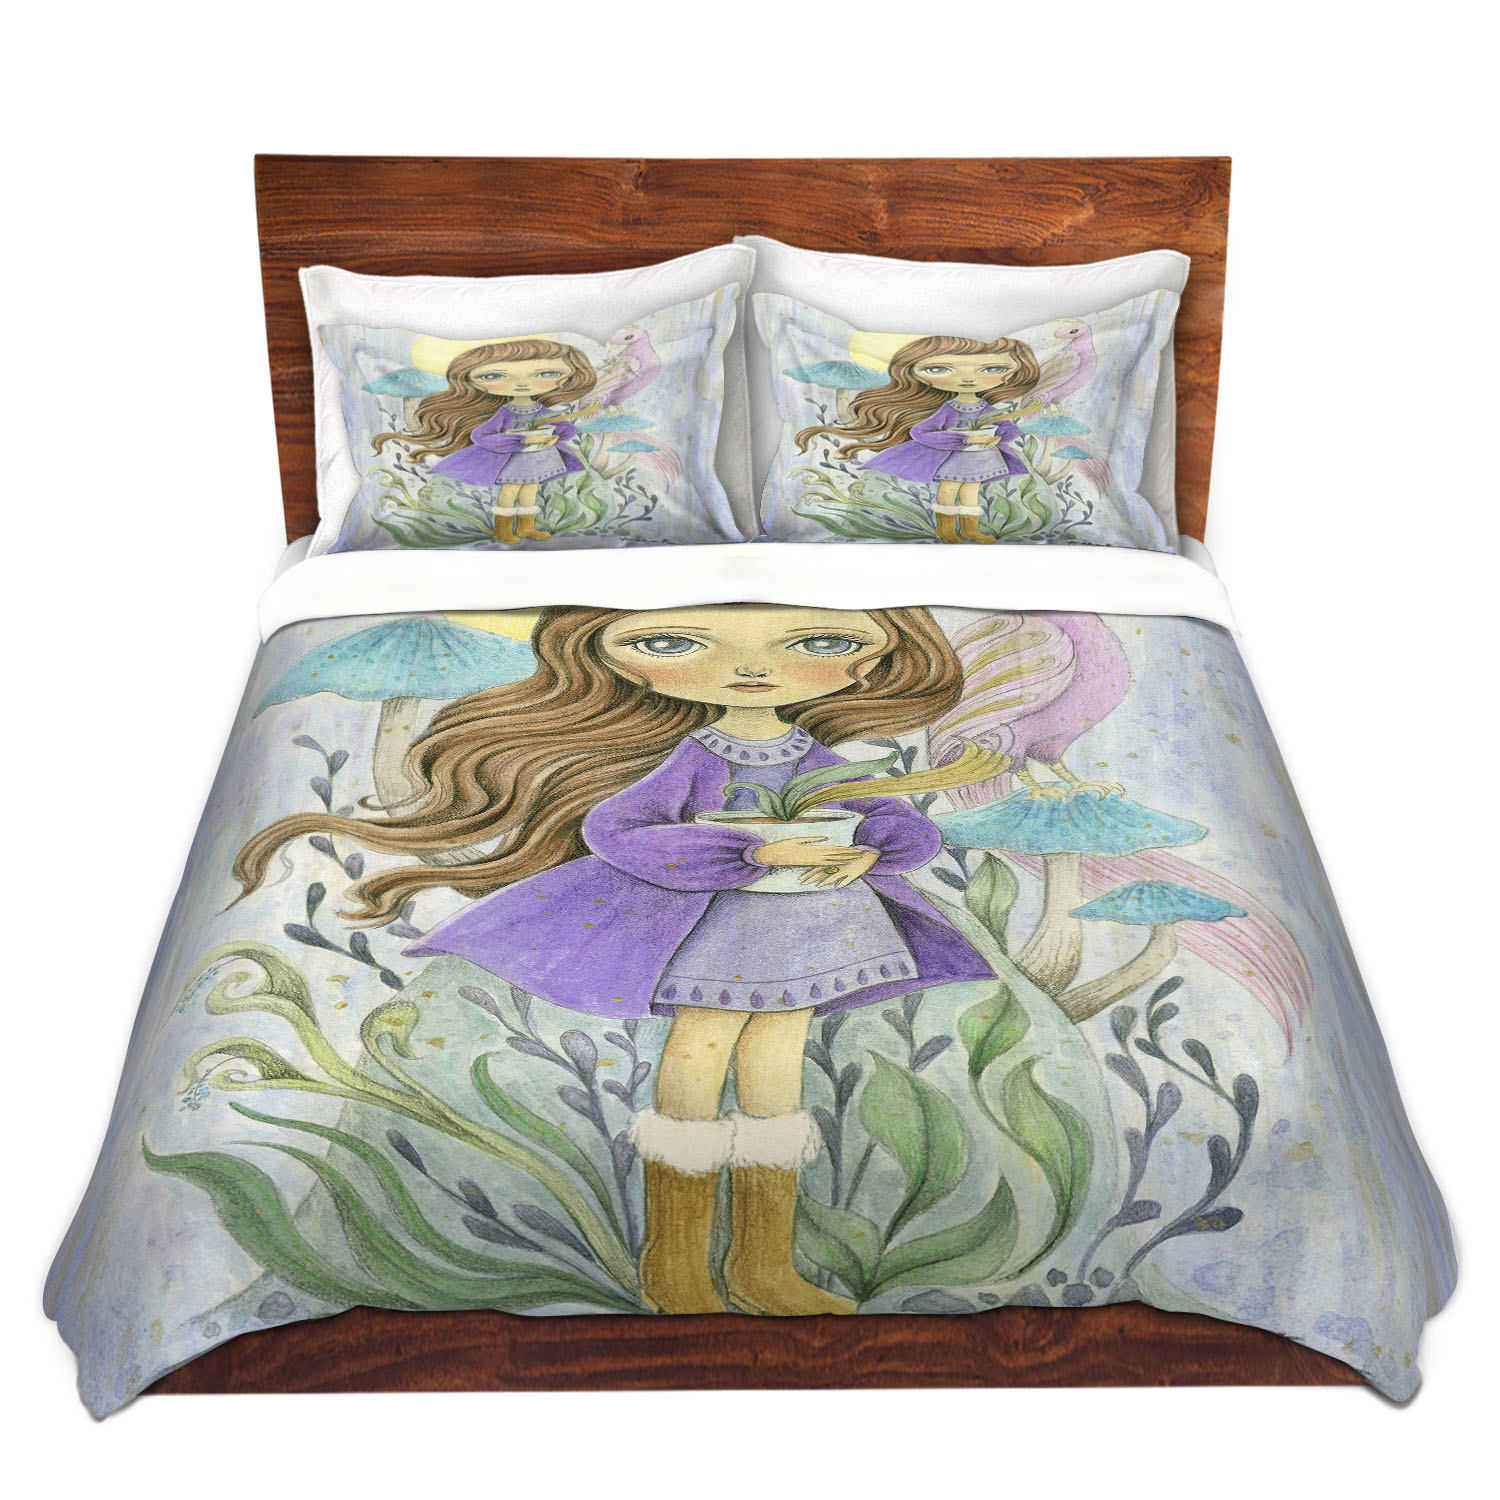 Dianoche Microfiber Duvet Covers By Amalia K. - Gift Of Gold